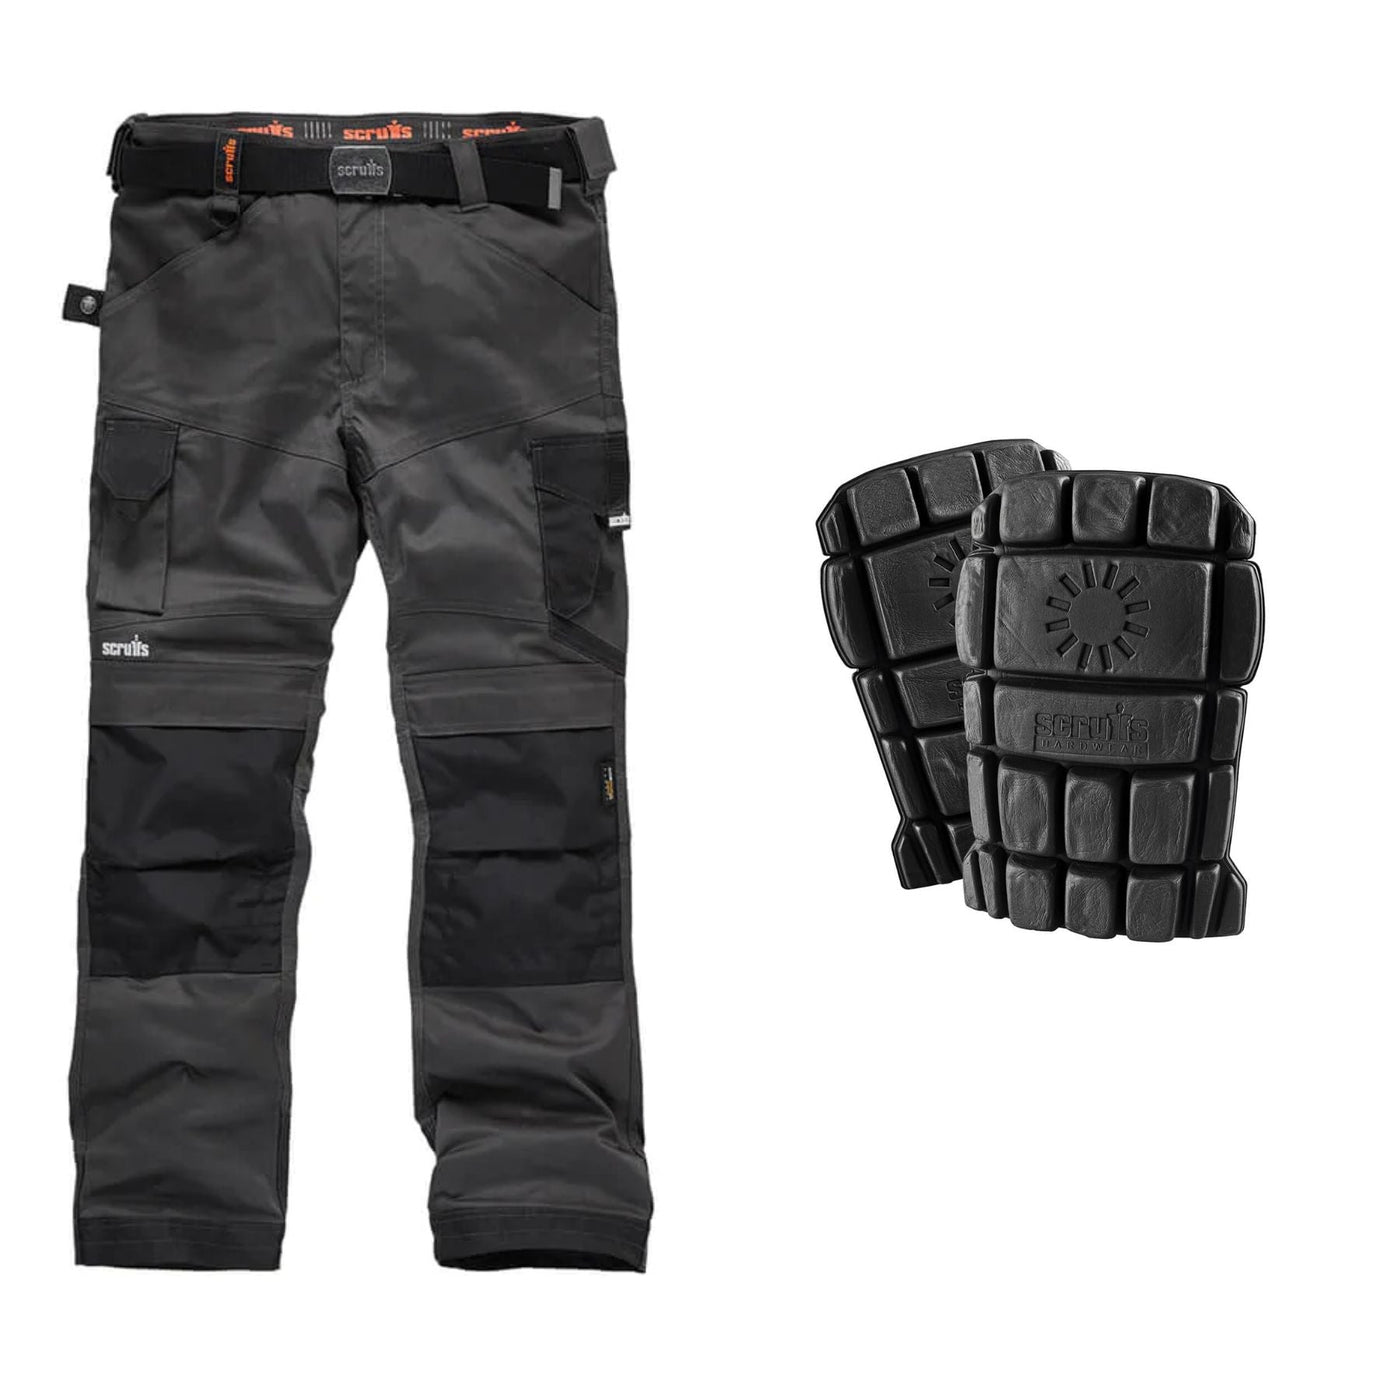 Scruffs Special Offer Pack - Pro Flex Work Trousers + Knee Pads